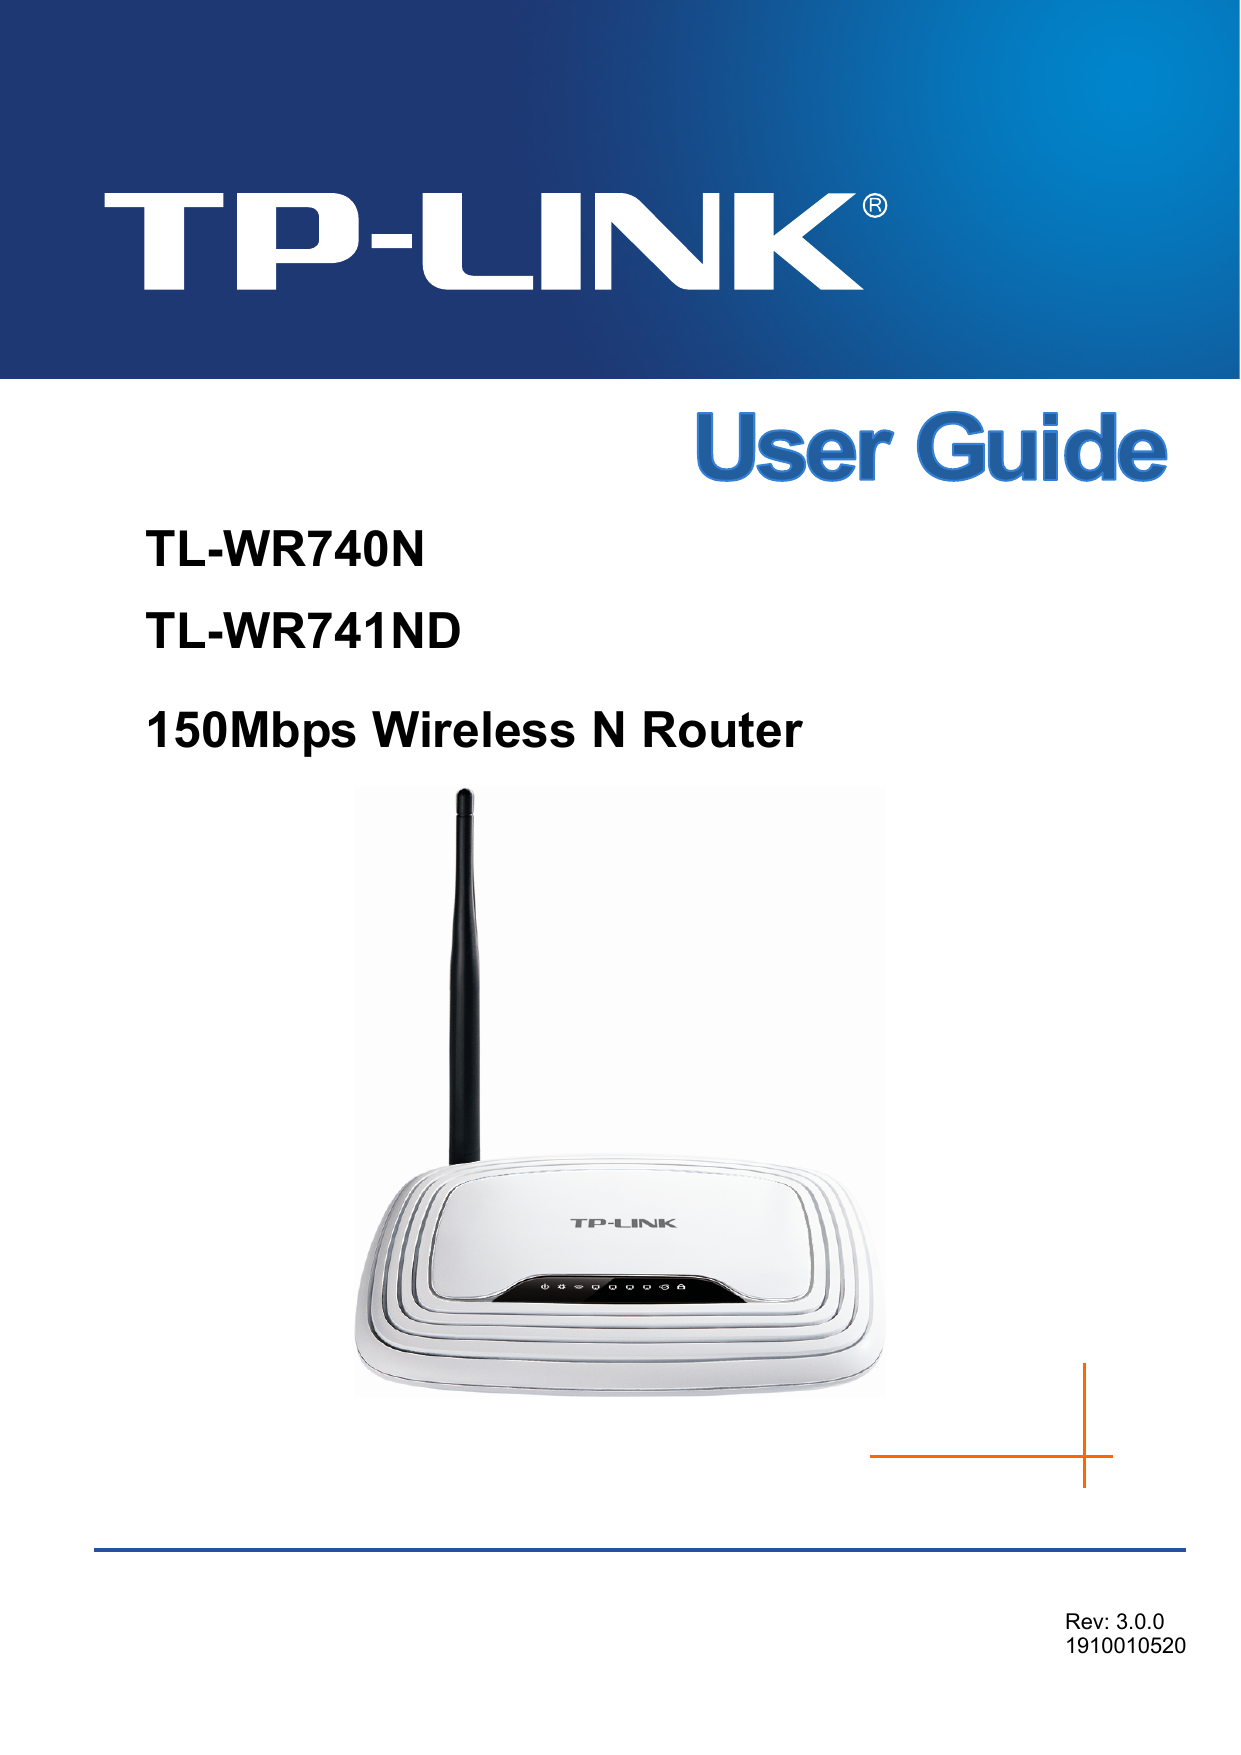     TL-WR740N TL-WR741ND 150Mbps Wireless N Router   Rev: 3.0.0 1910010520 